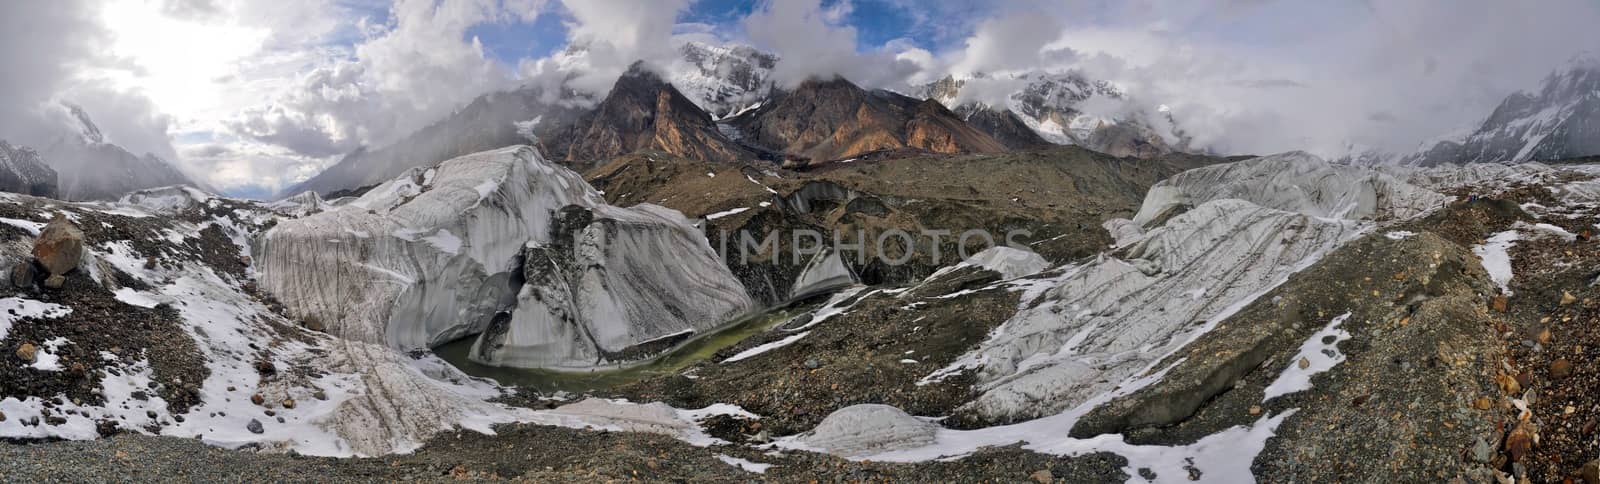 Panorama of scenic Engilchek glacier with picturesque Tian Shan mountain range in Kyrgyzstan